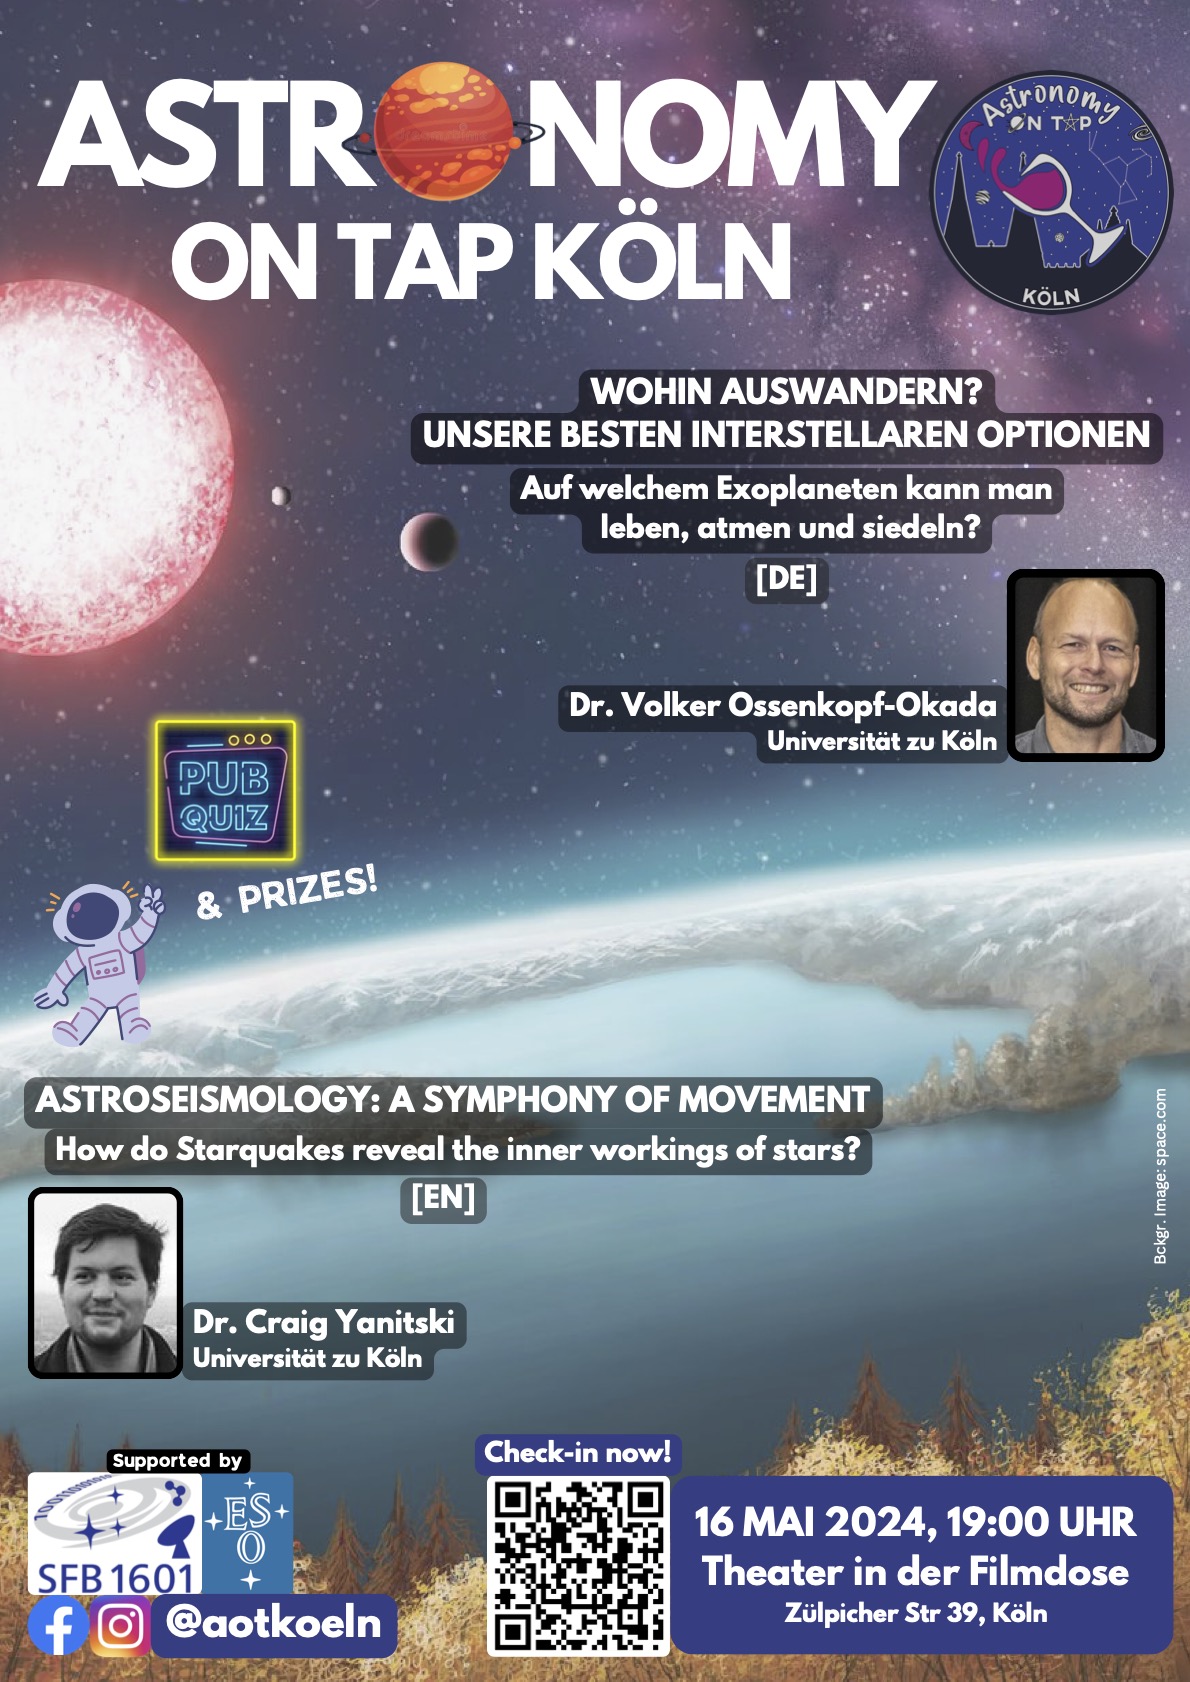 Next Astronomy on Tap event in Cologne